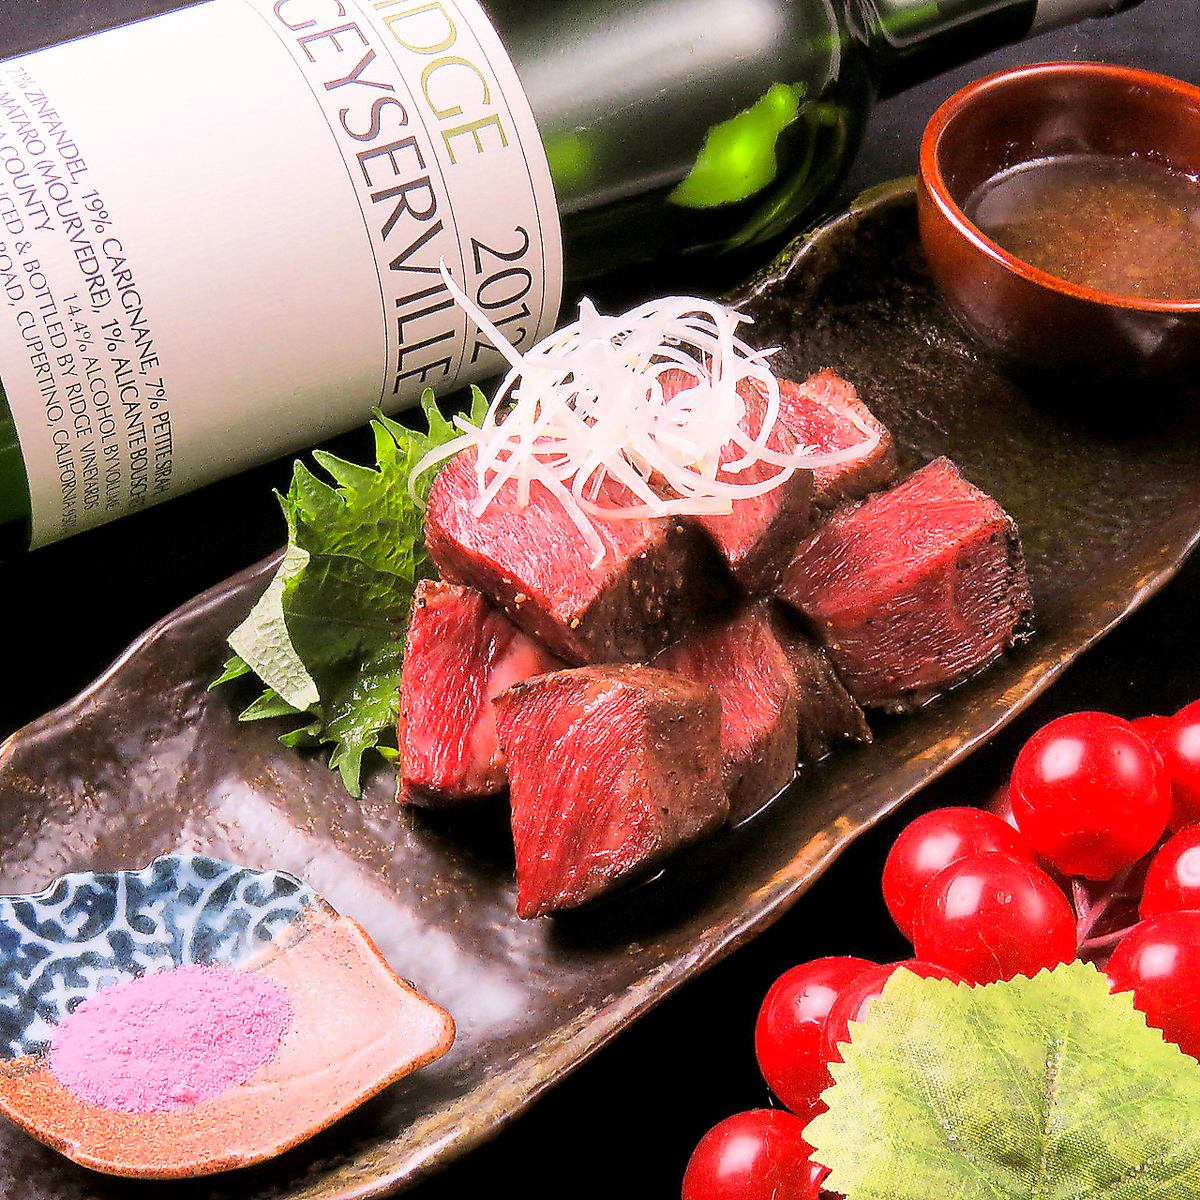 The umami is exquisite! Broiled Maru Misumi, a rare cut of Awa beef, costs 2,068 JPY (incl.)